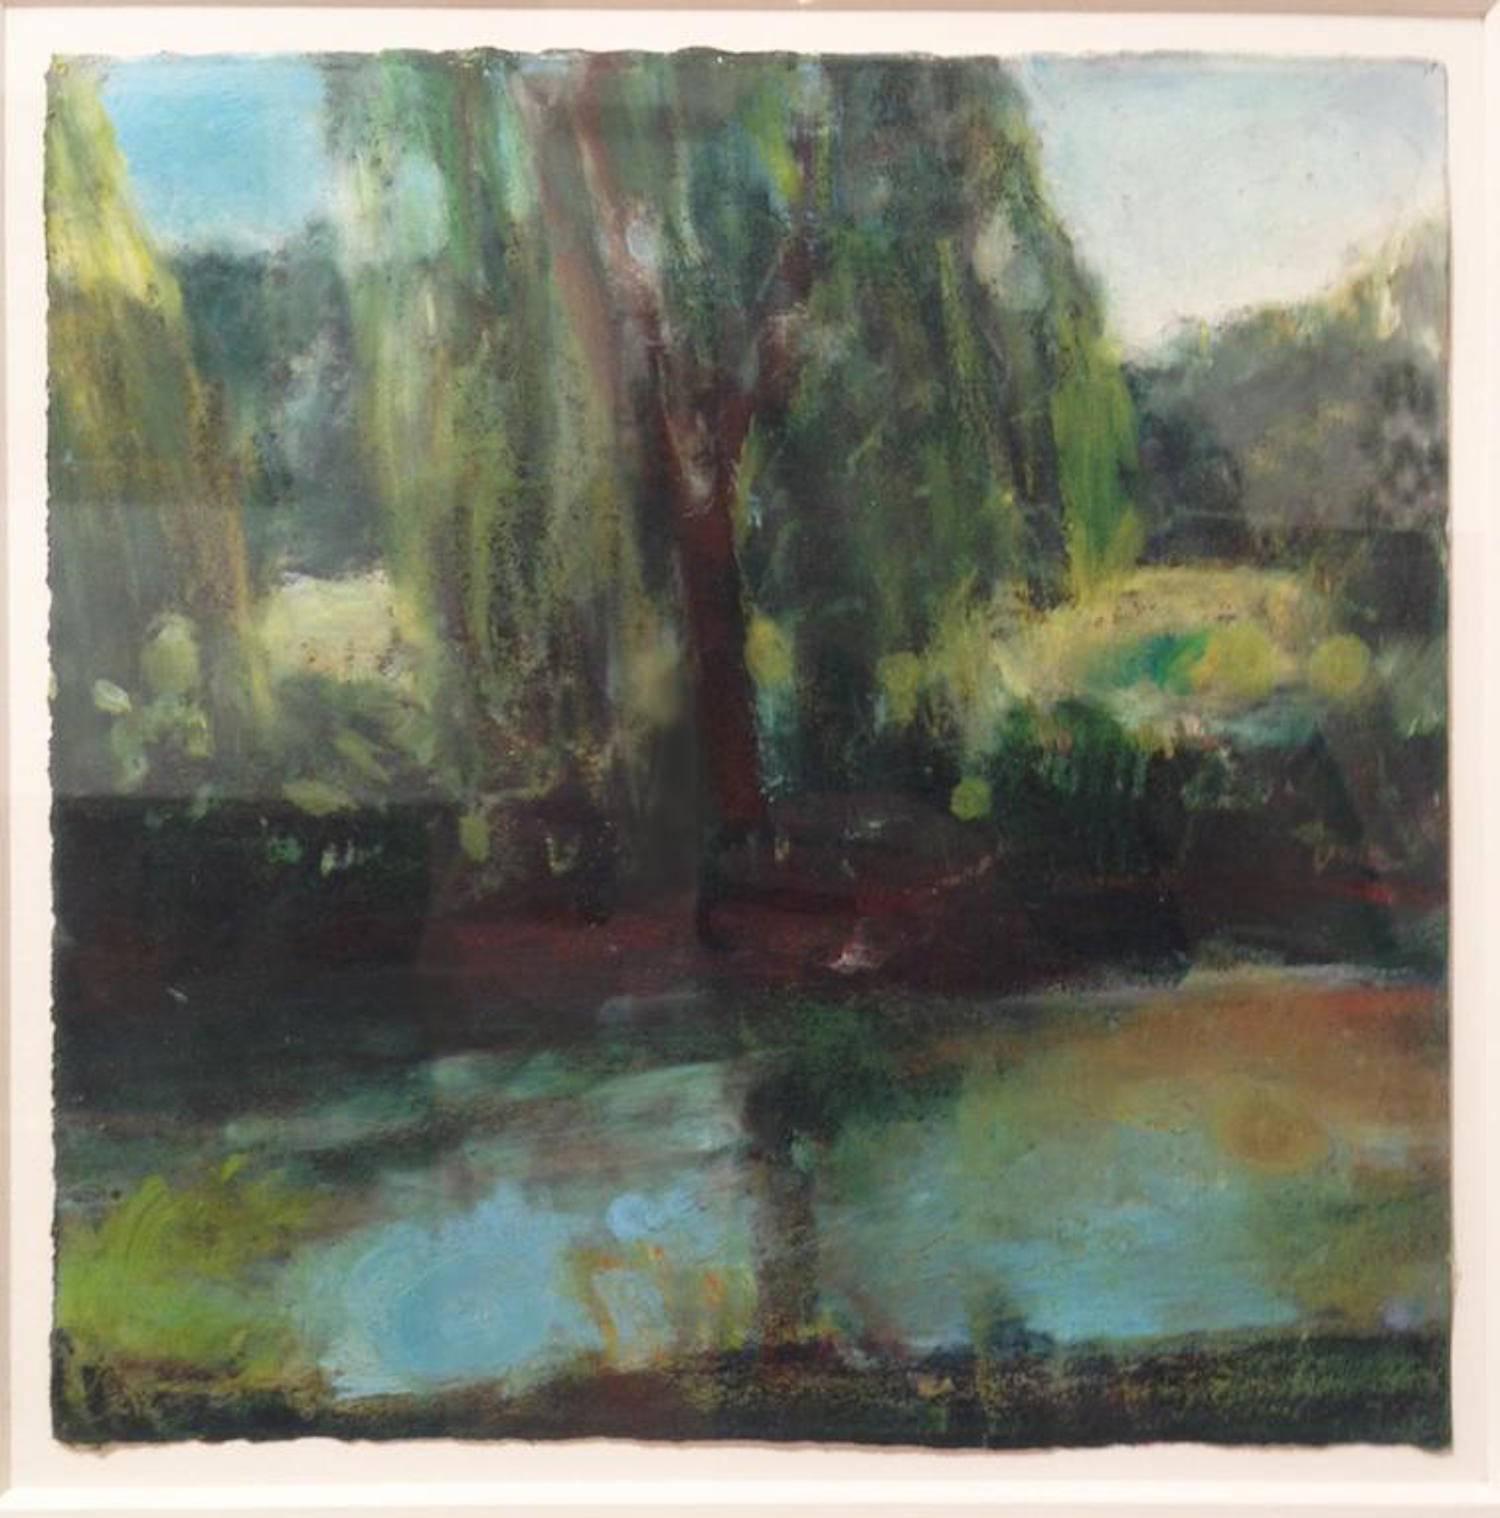 In her Impressionist oil pastel, Willow, Daisy Craddock uses the soft, malleable quality of her medium to render the quiet immensity of the willow tree. Bathed in a sort of hush, facilitated by the velvet surface of her pastel, Craddock's blues,